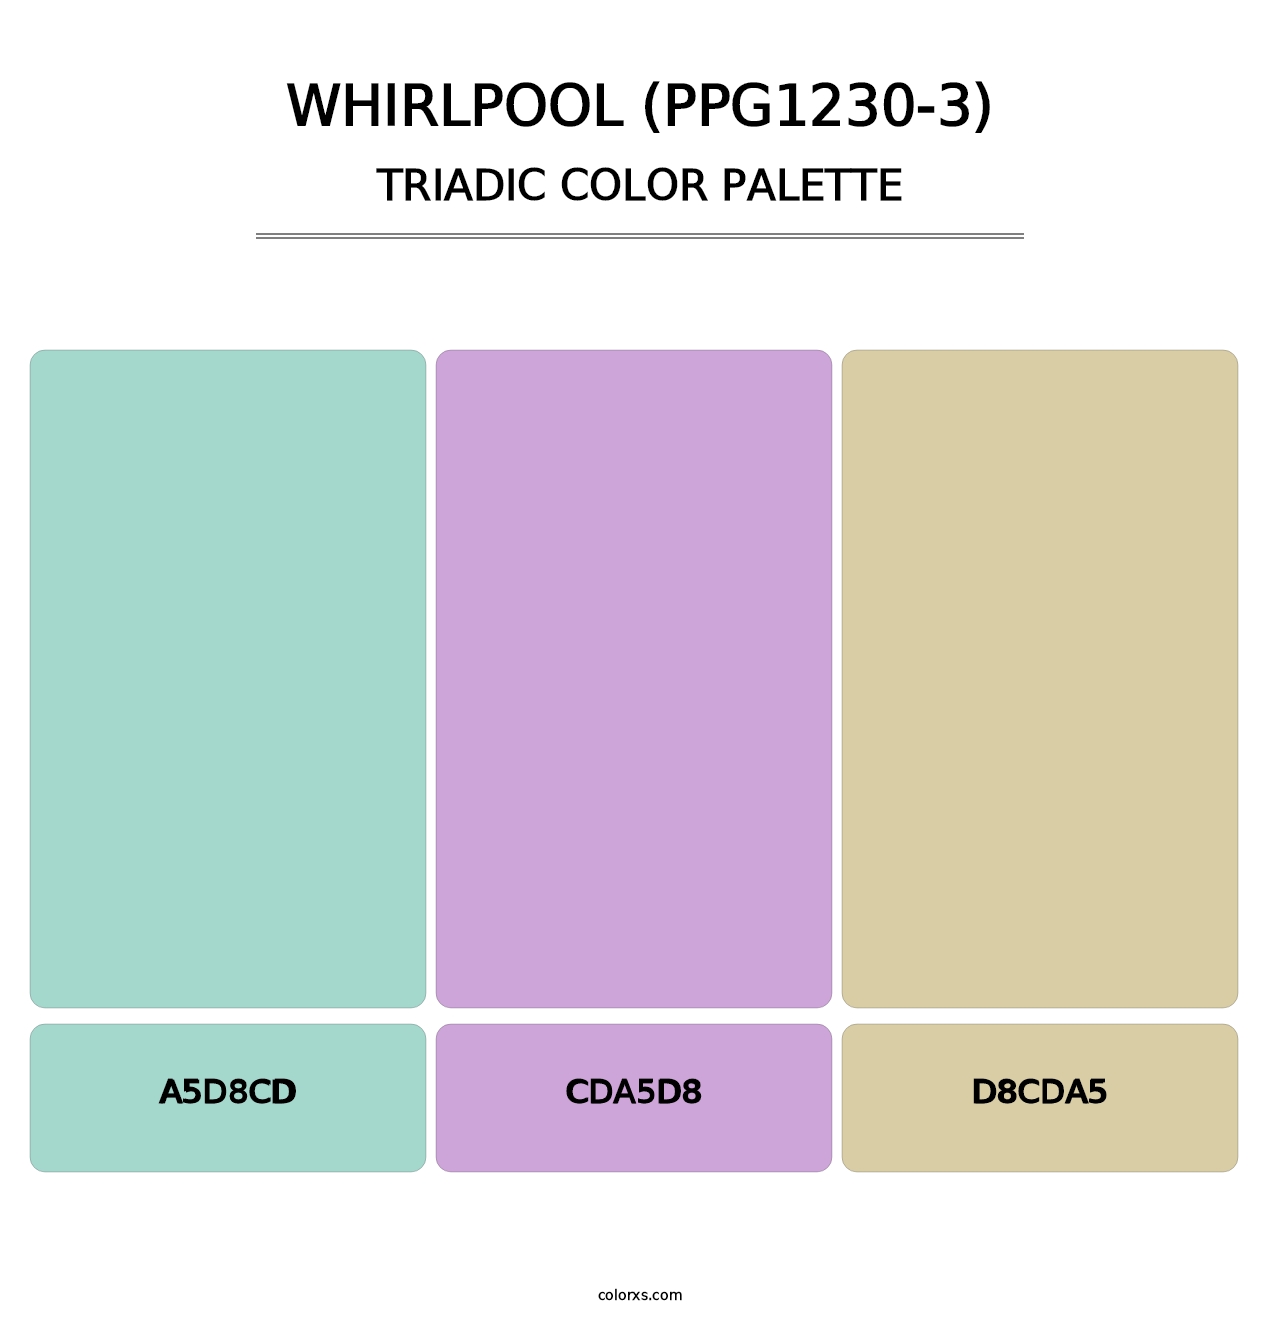 Whirlpool (PPG1230-3) - Triadic Color Palette